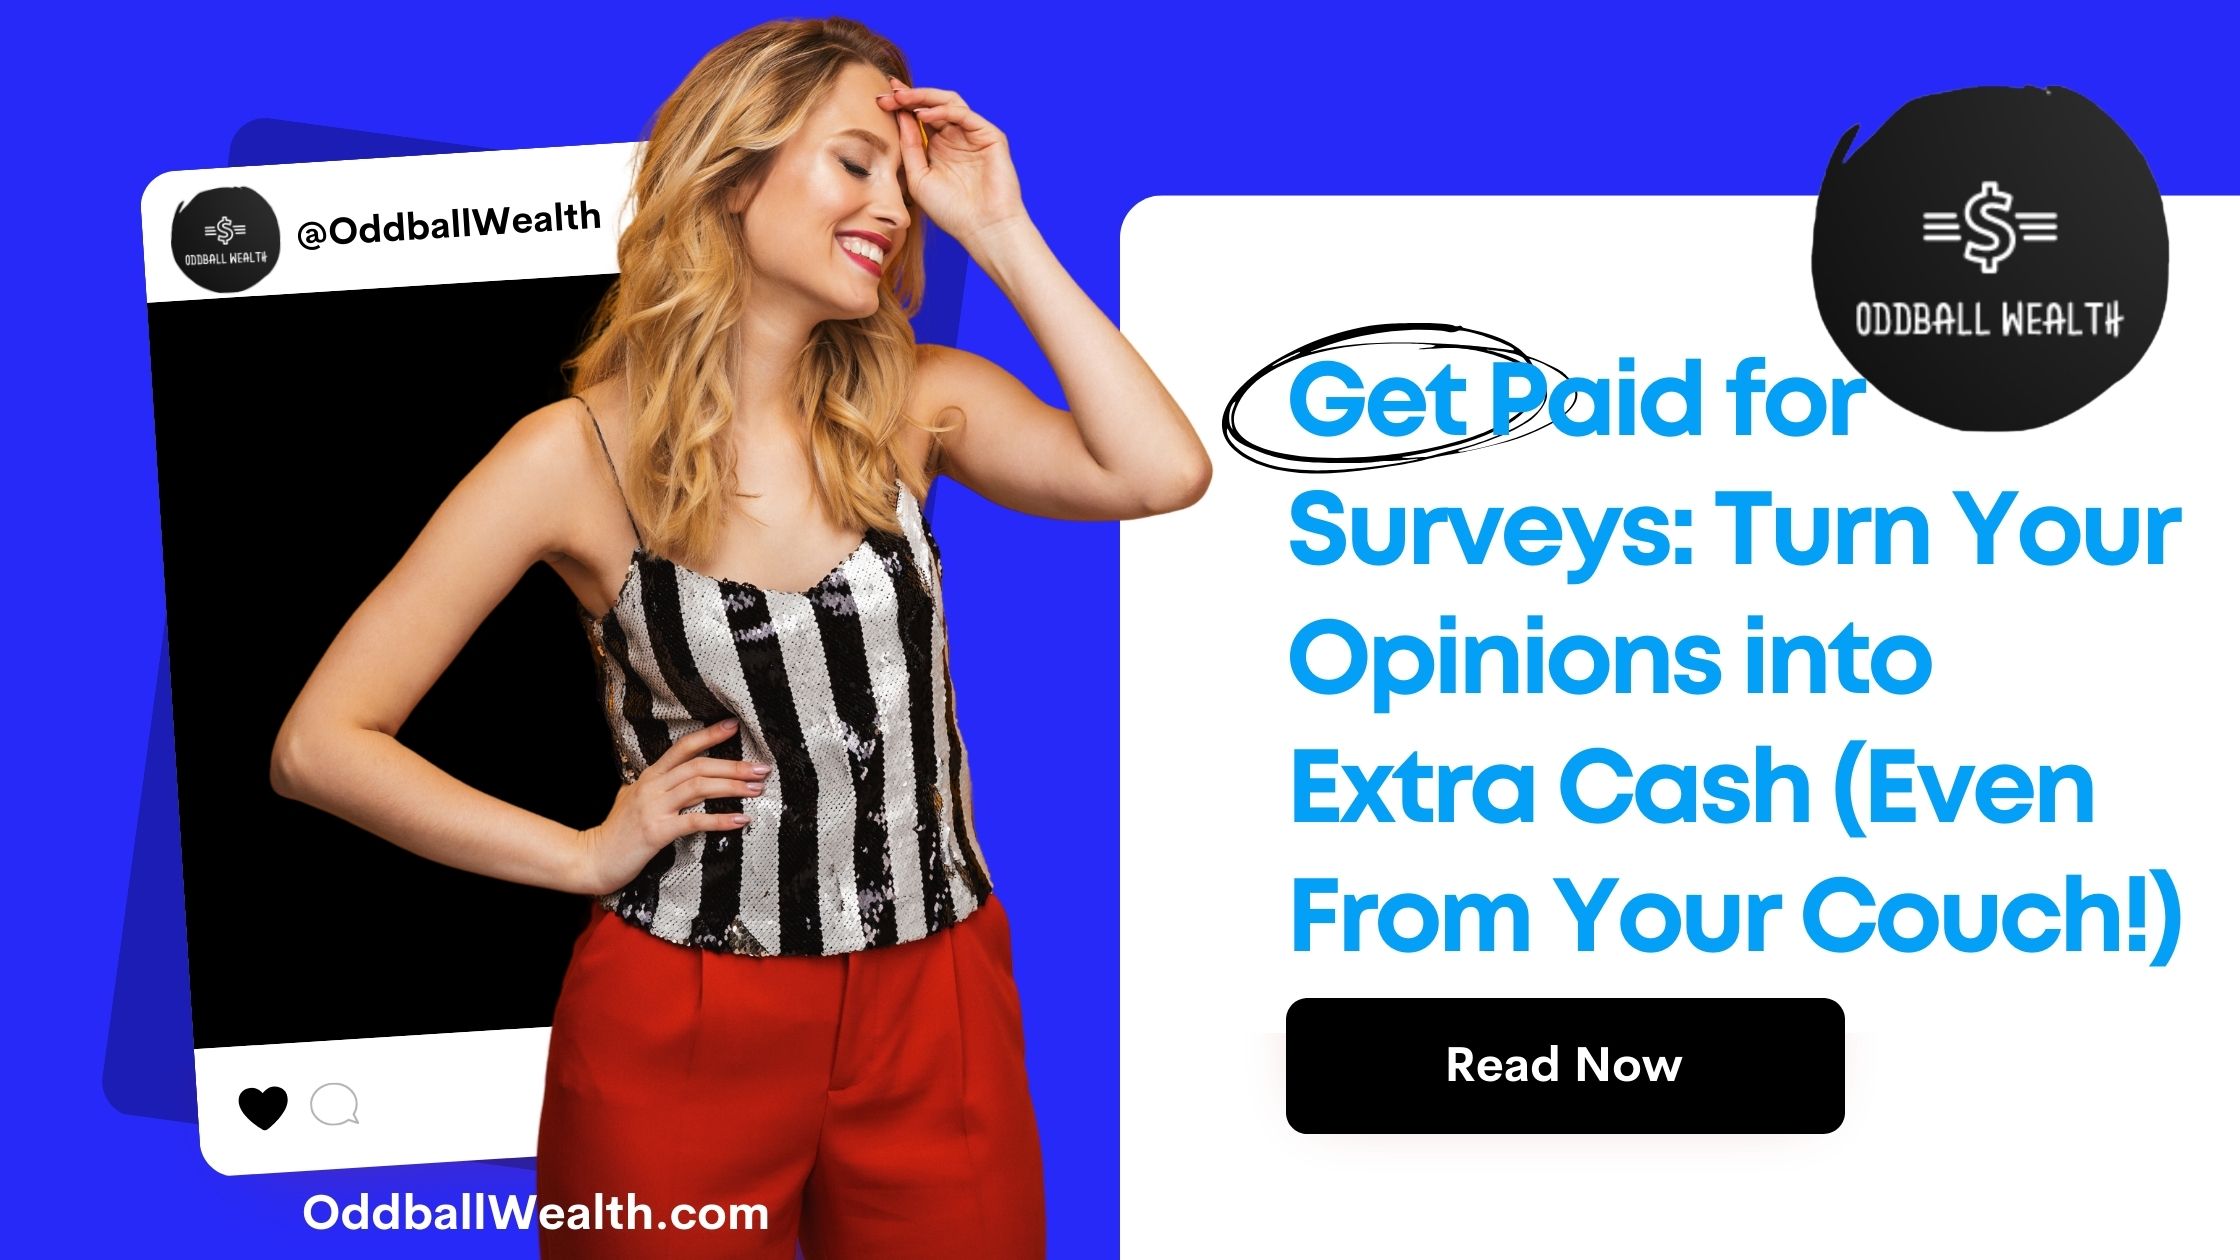 Get Paid for Surveys: Turn Your Opinions into Extra Cash (Even From Your Couch!)